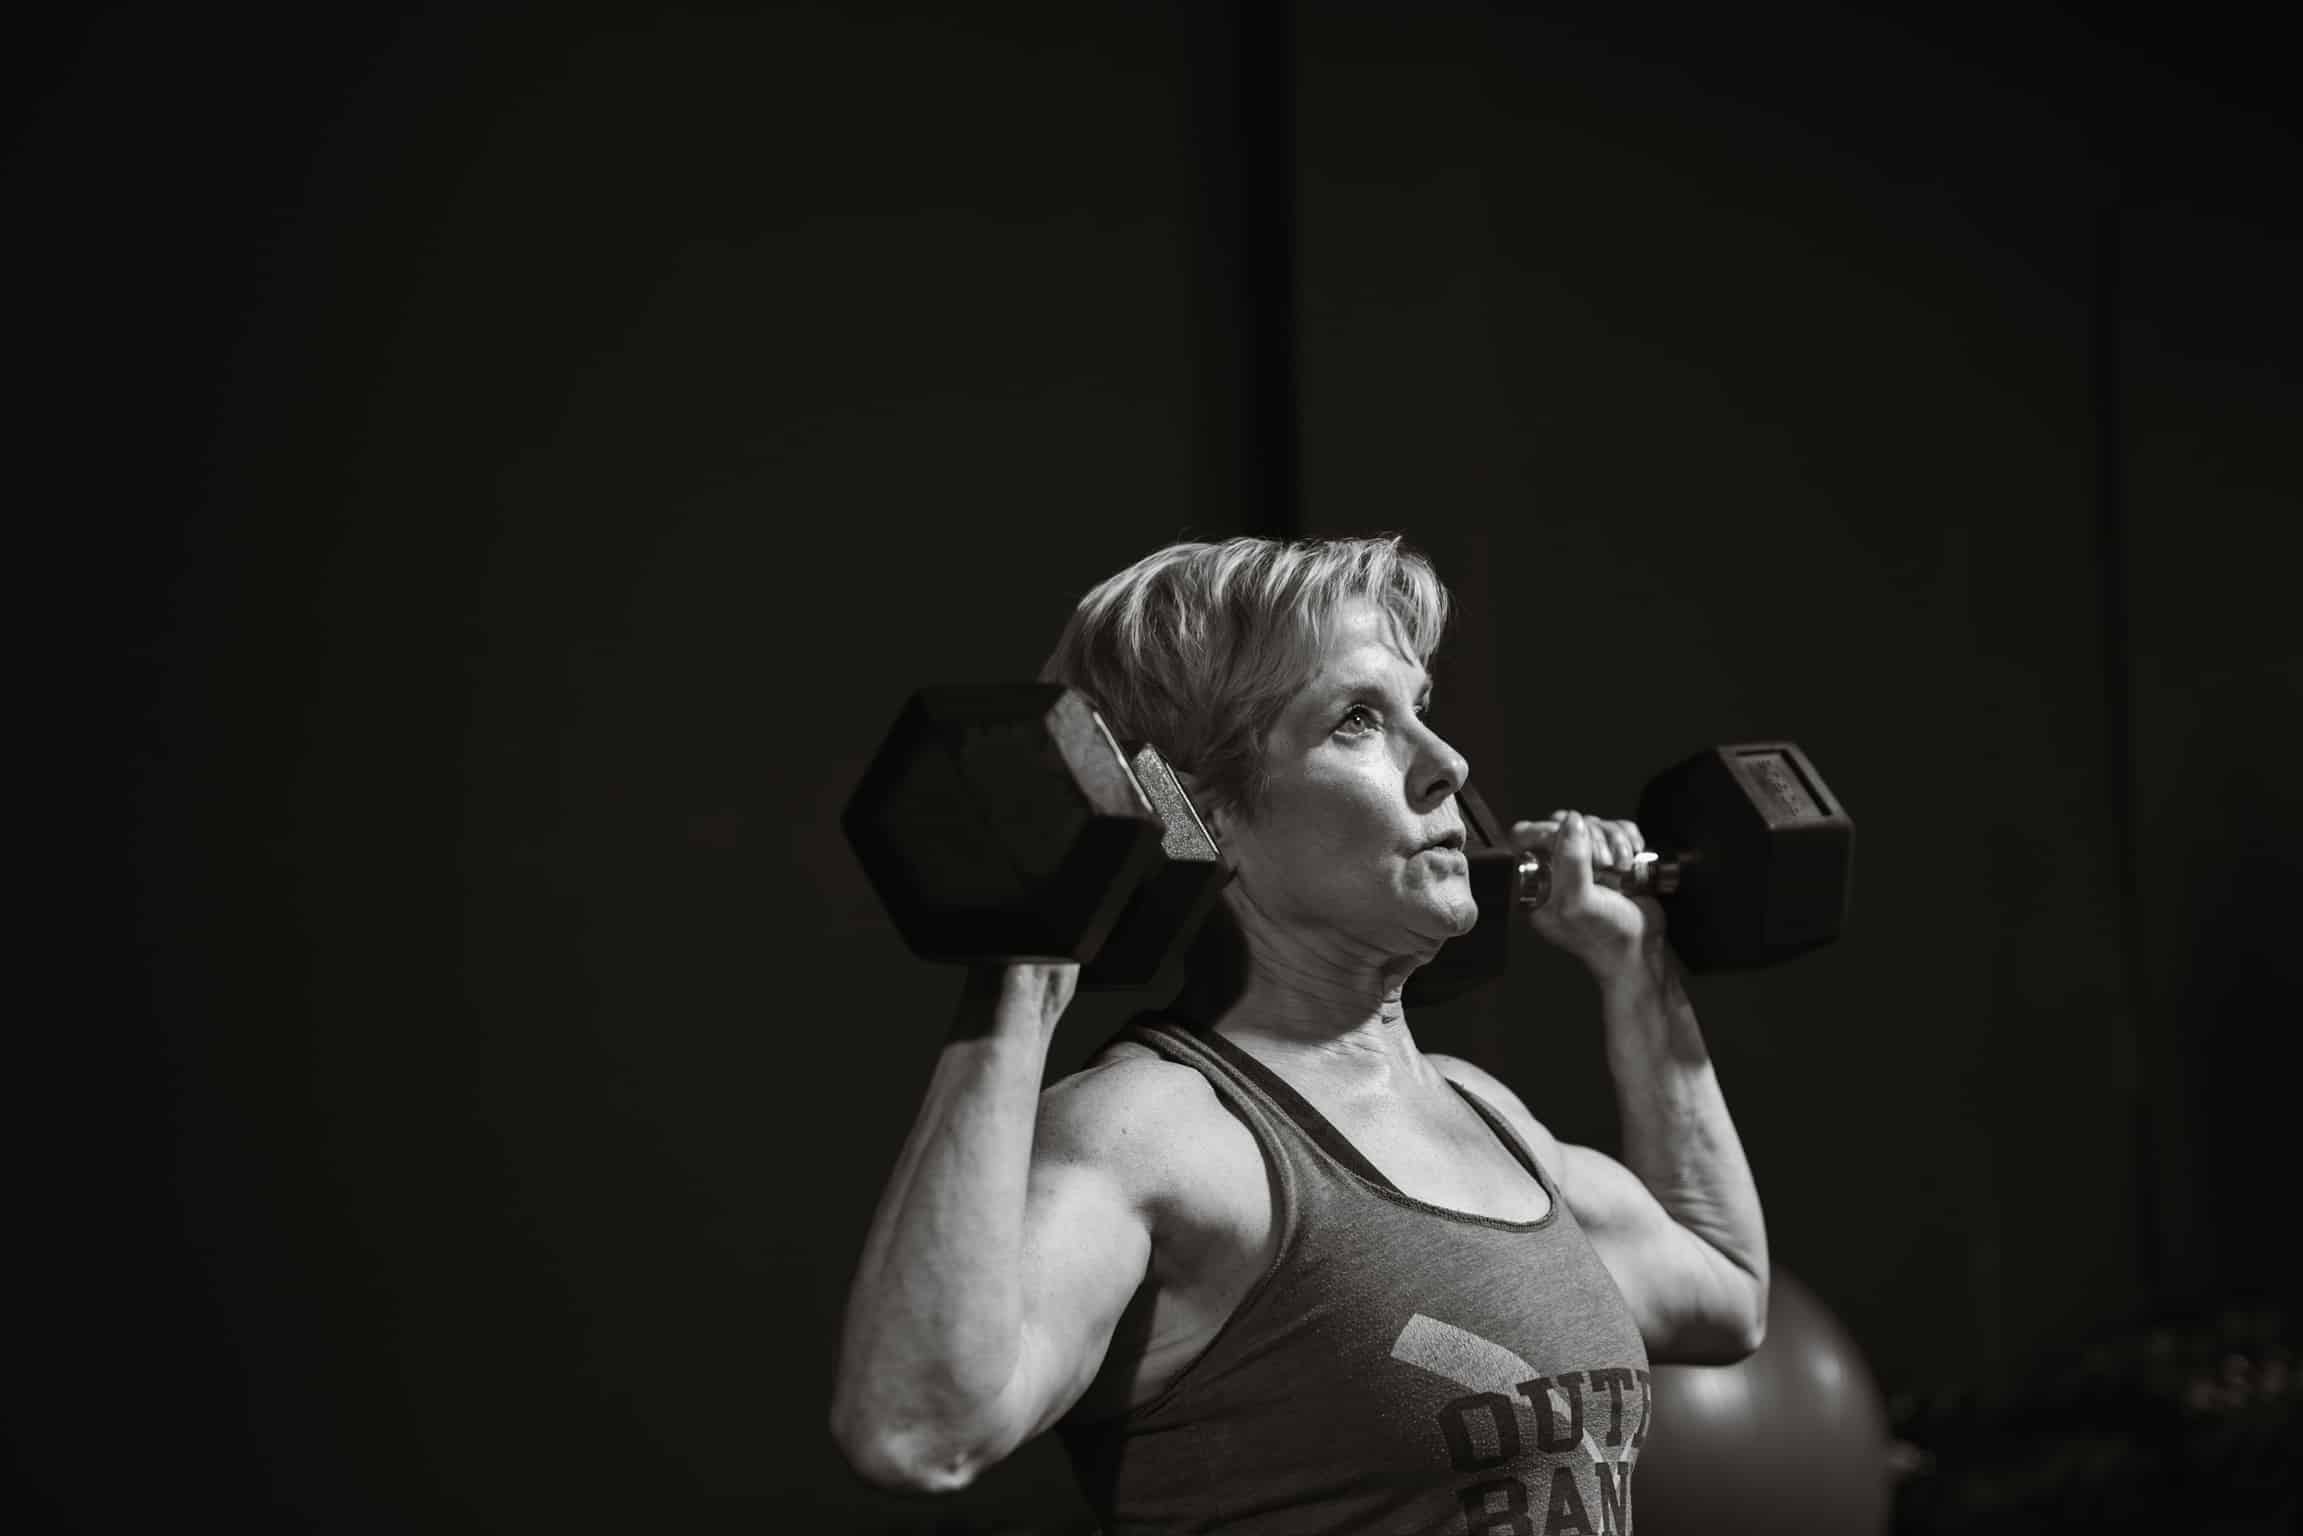 Libby training at Beyond Strength during a muscle growth (hypertrophy) phase